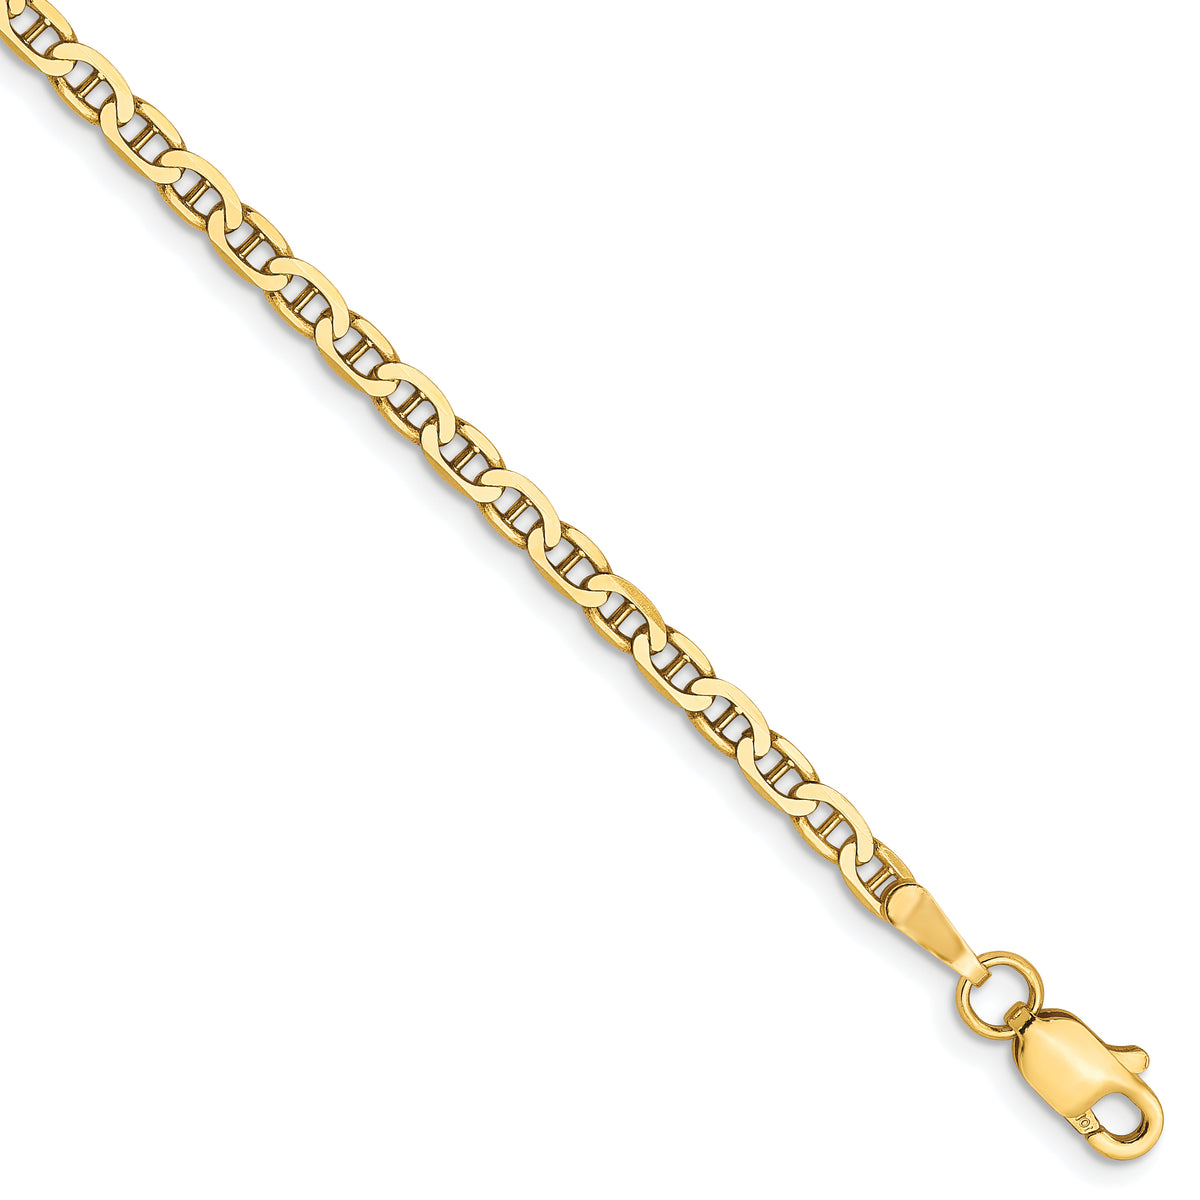 10K 2.4mm Flat Anchor Chain Anklet